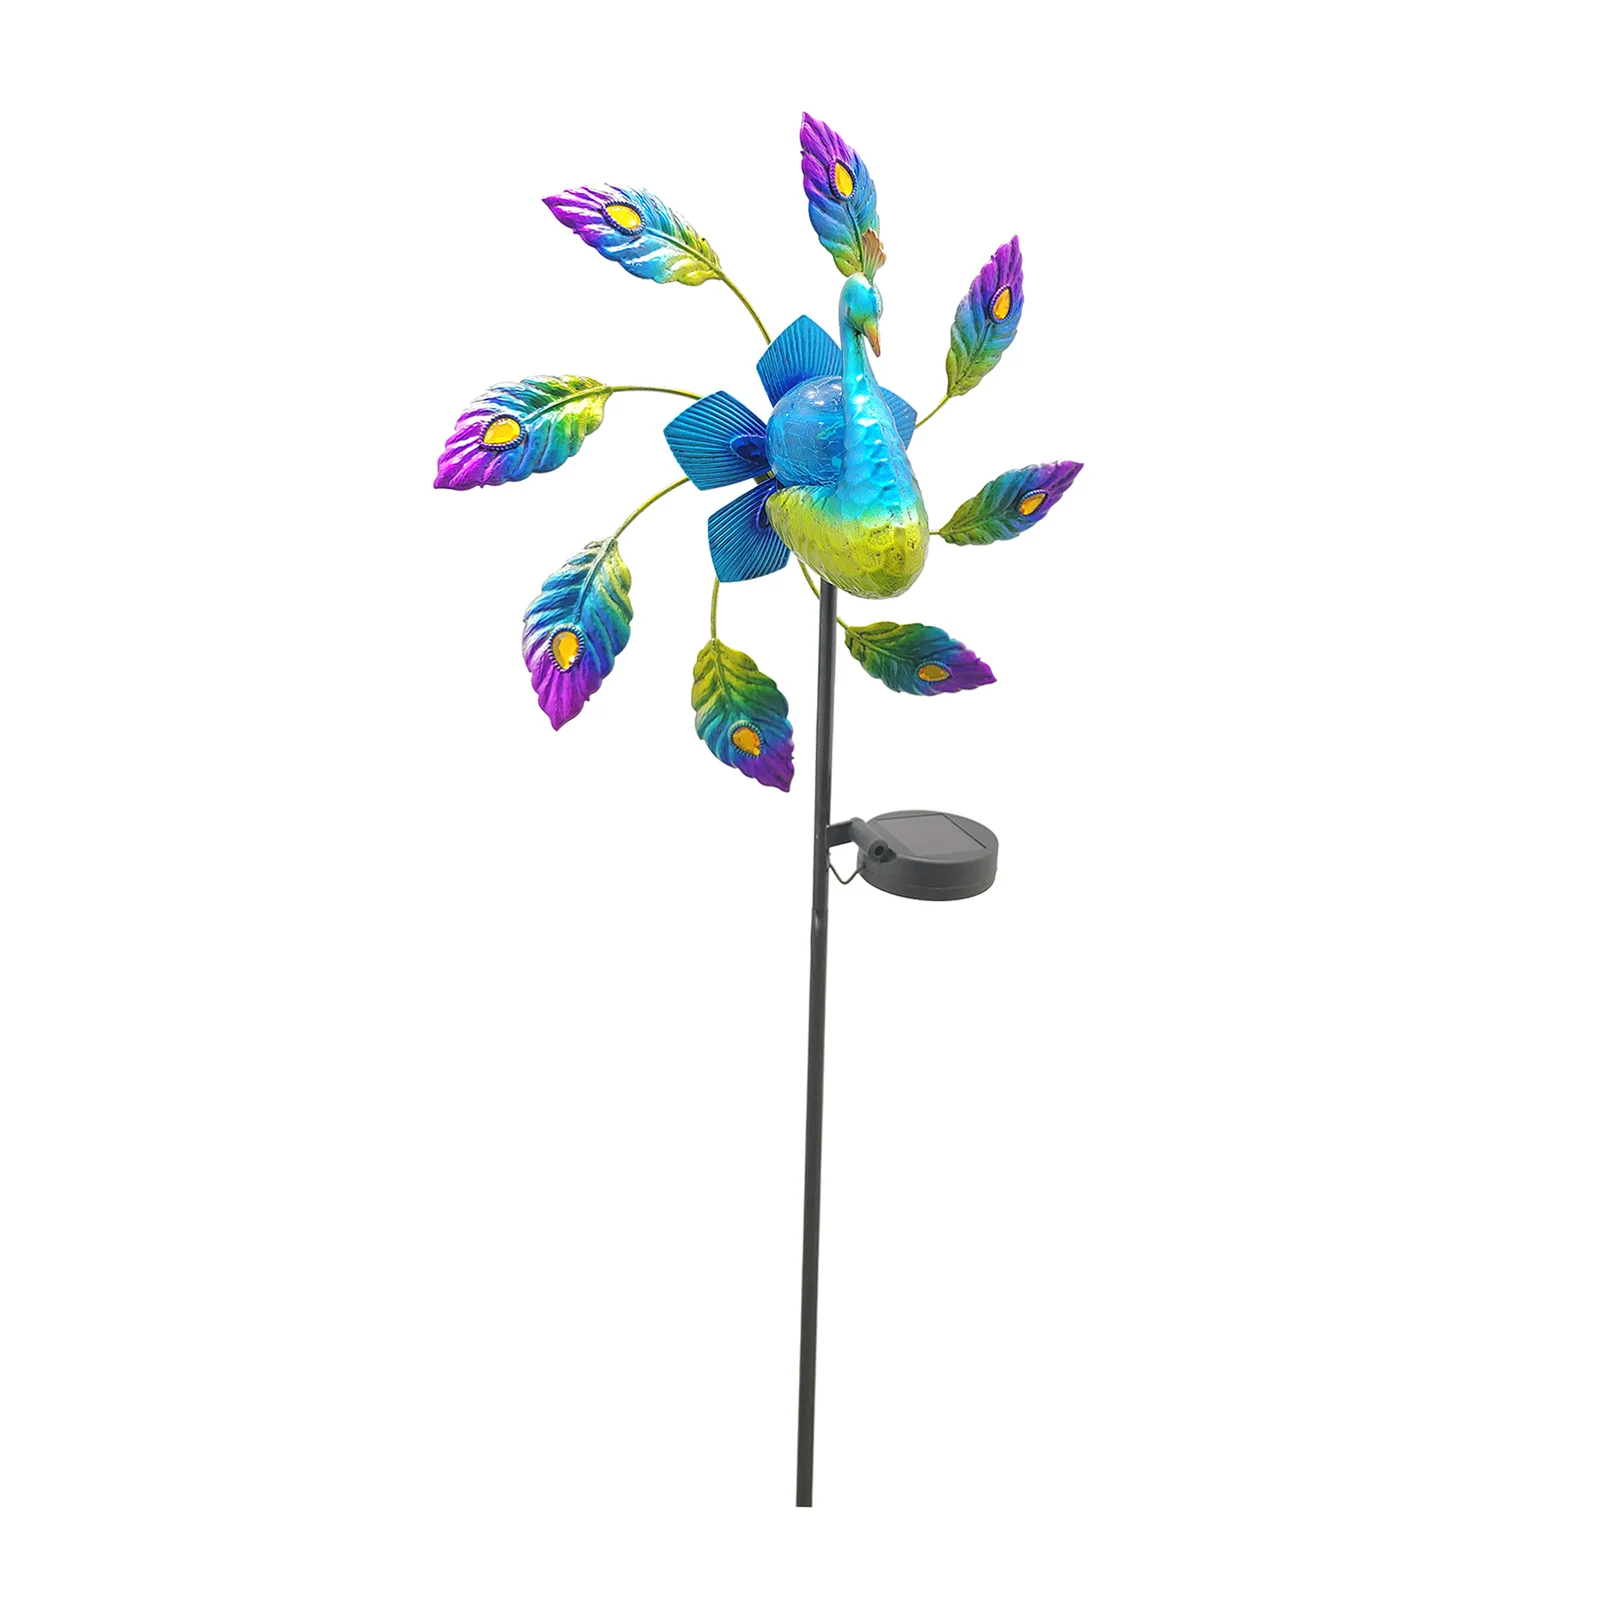 Decorative Wind Spinners Wrought Iron Painted Peacock Decorative Backyard Stakes Solar Light Windmill Yard And Garden Home Decor